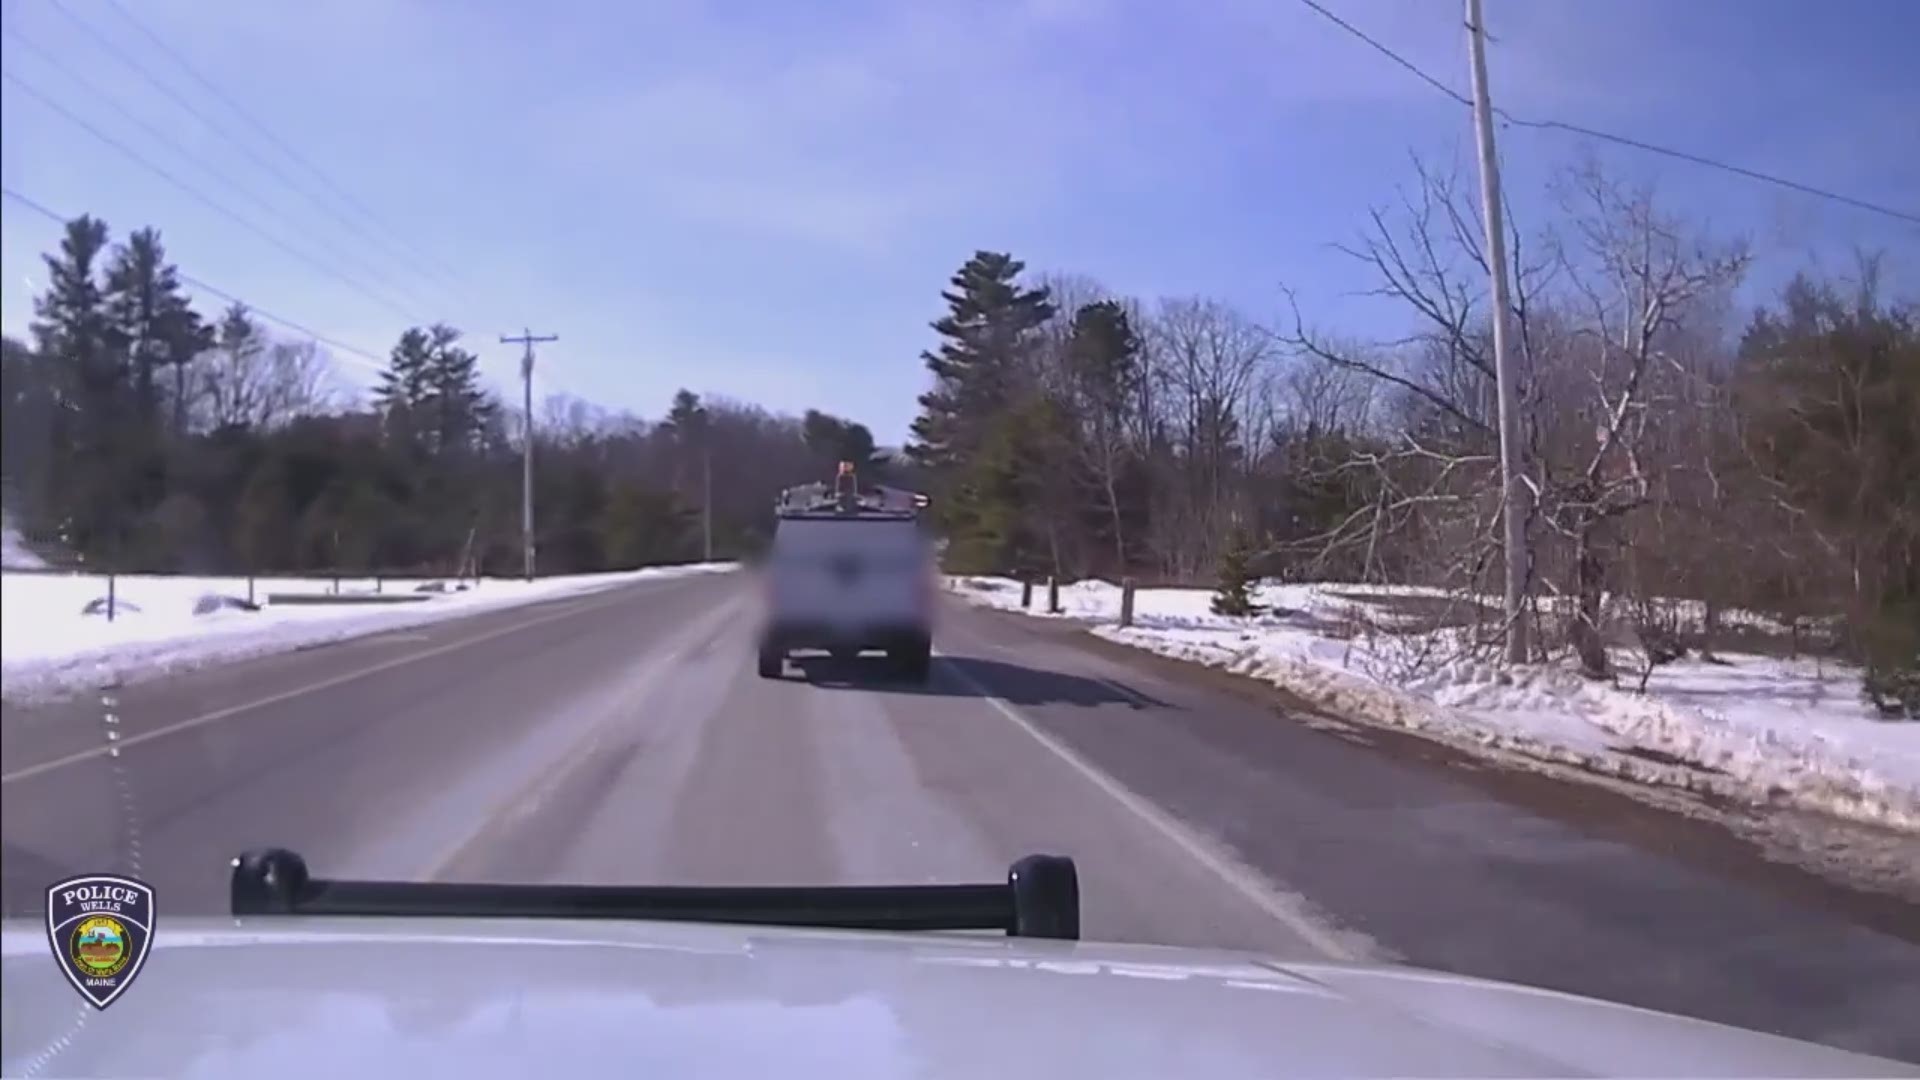 The Wells Police Department shared a video of another driver that failed to pull over when sirens and lights are obvious